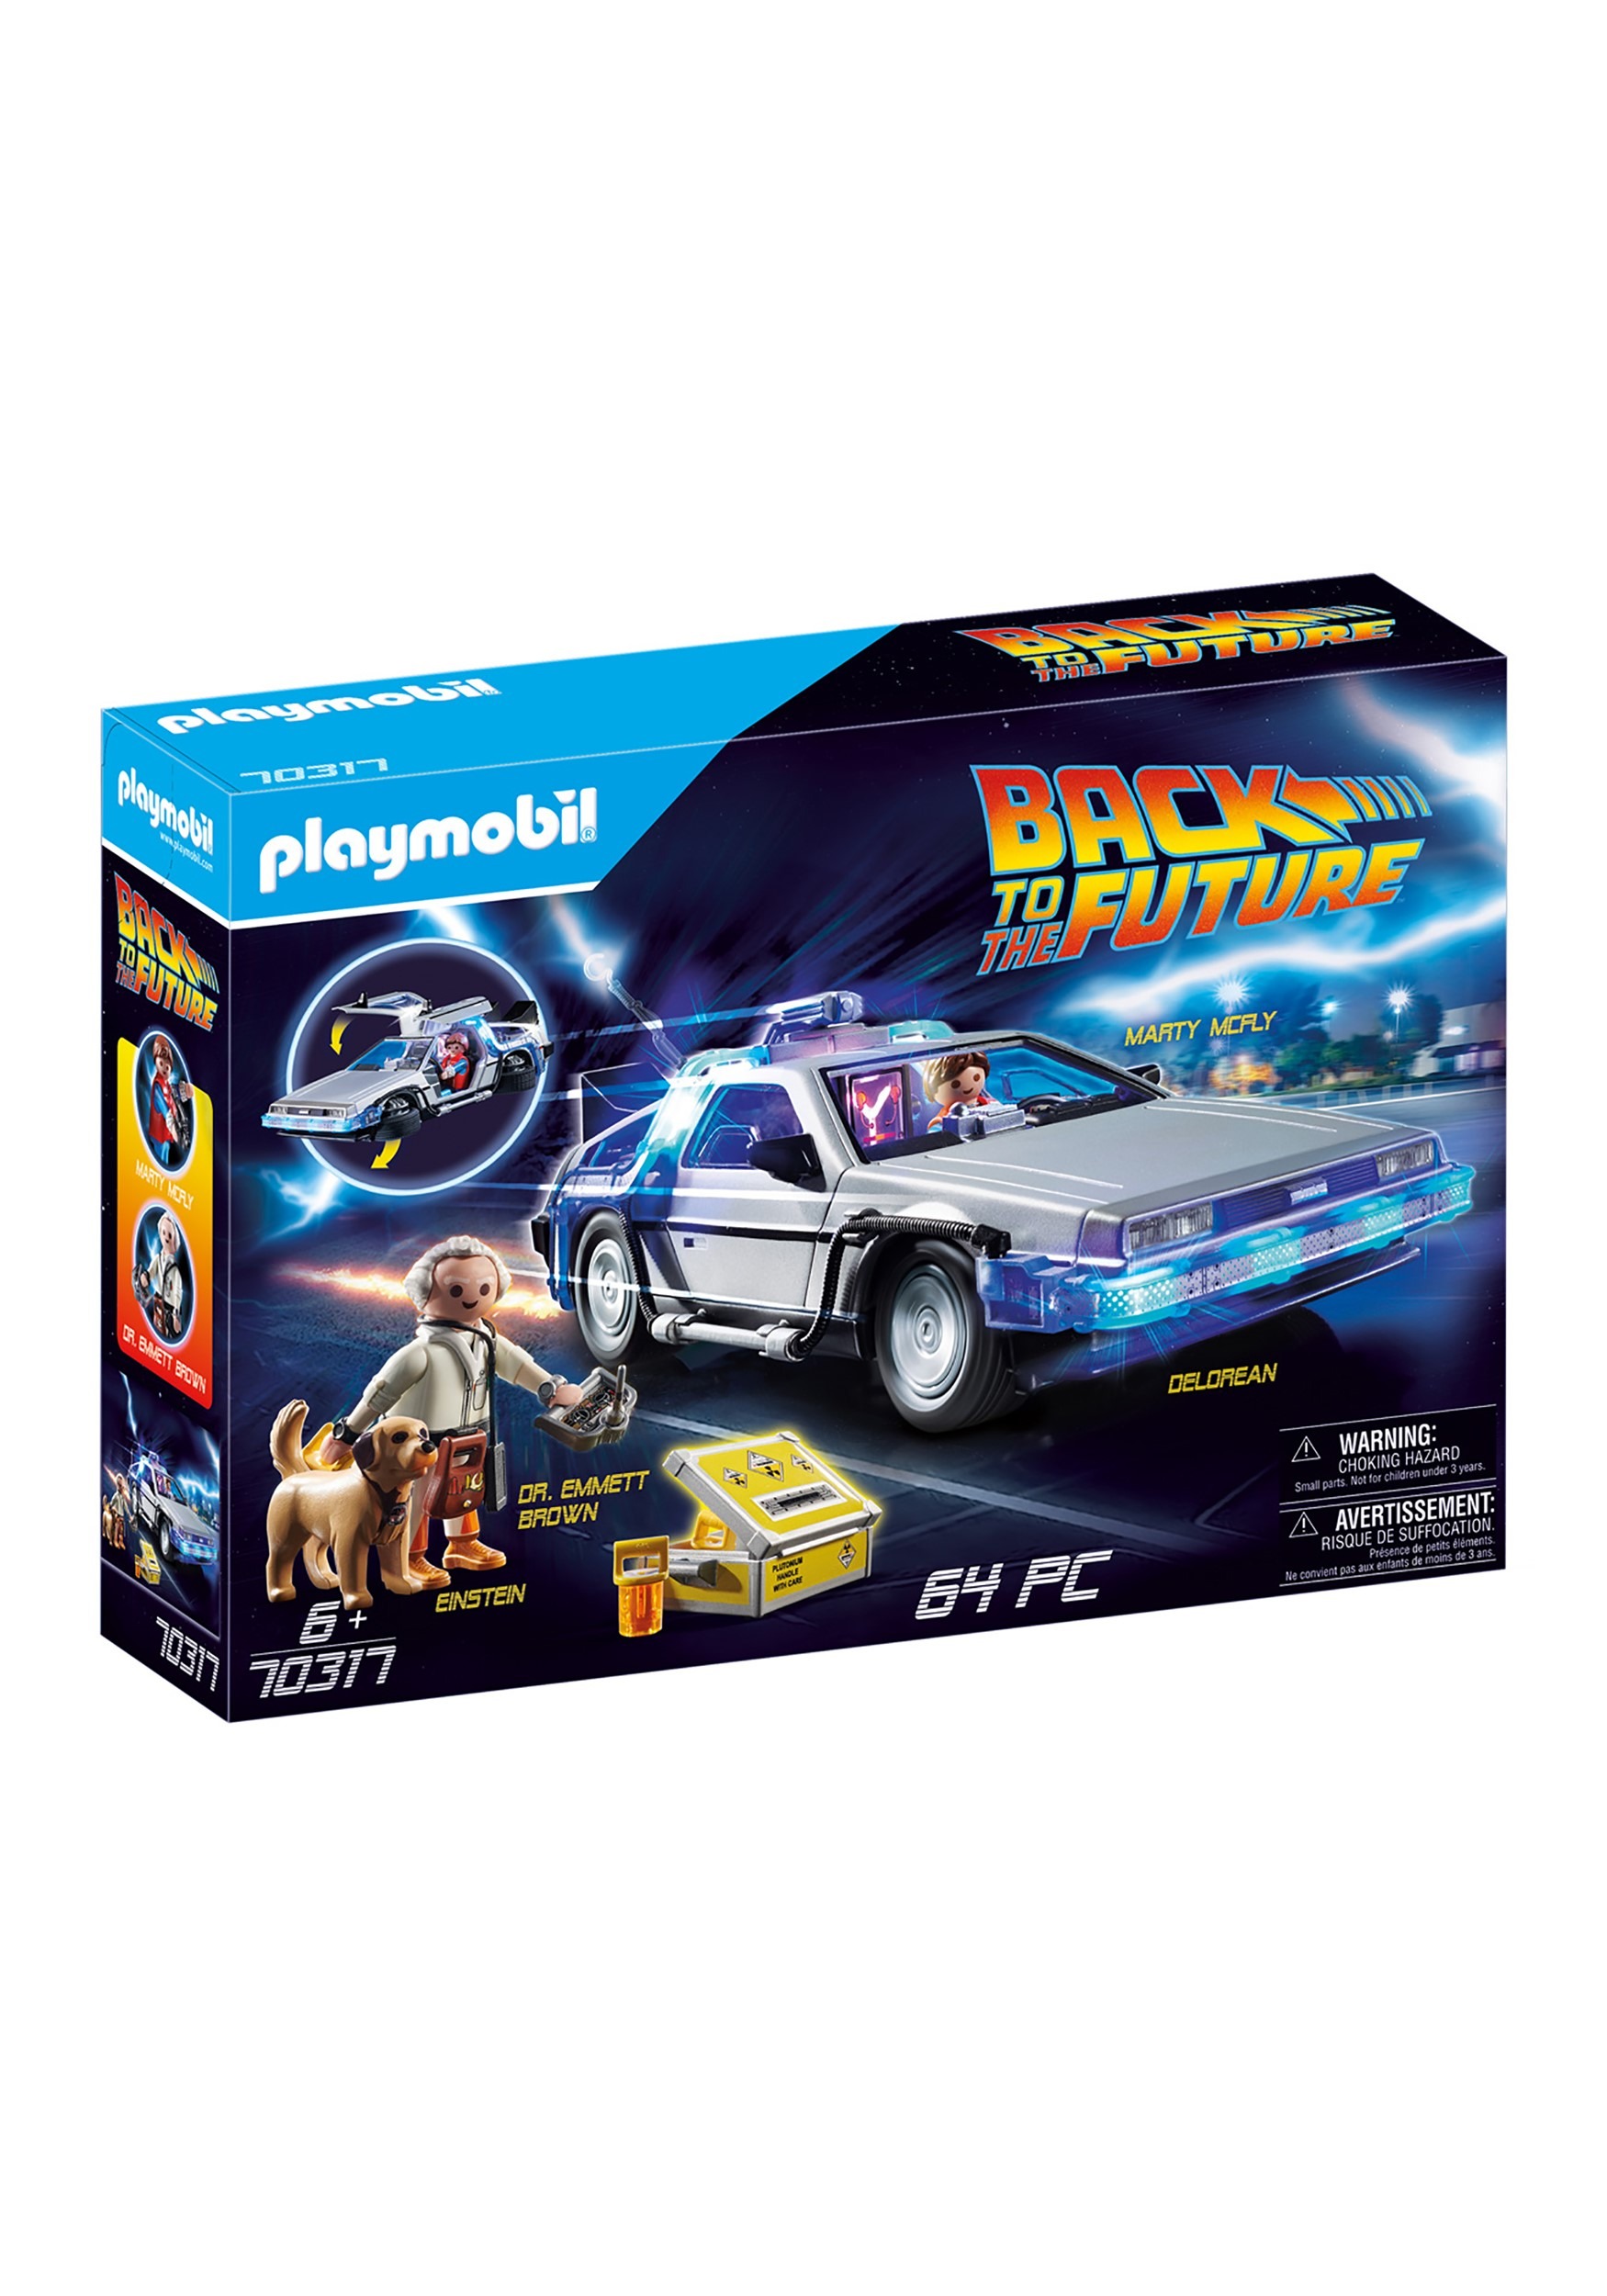 Back to the Future Playmobil DeLorean Playset